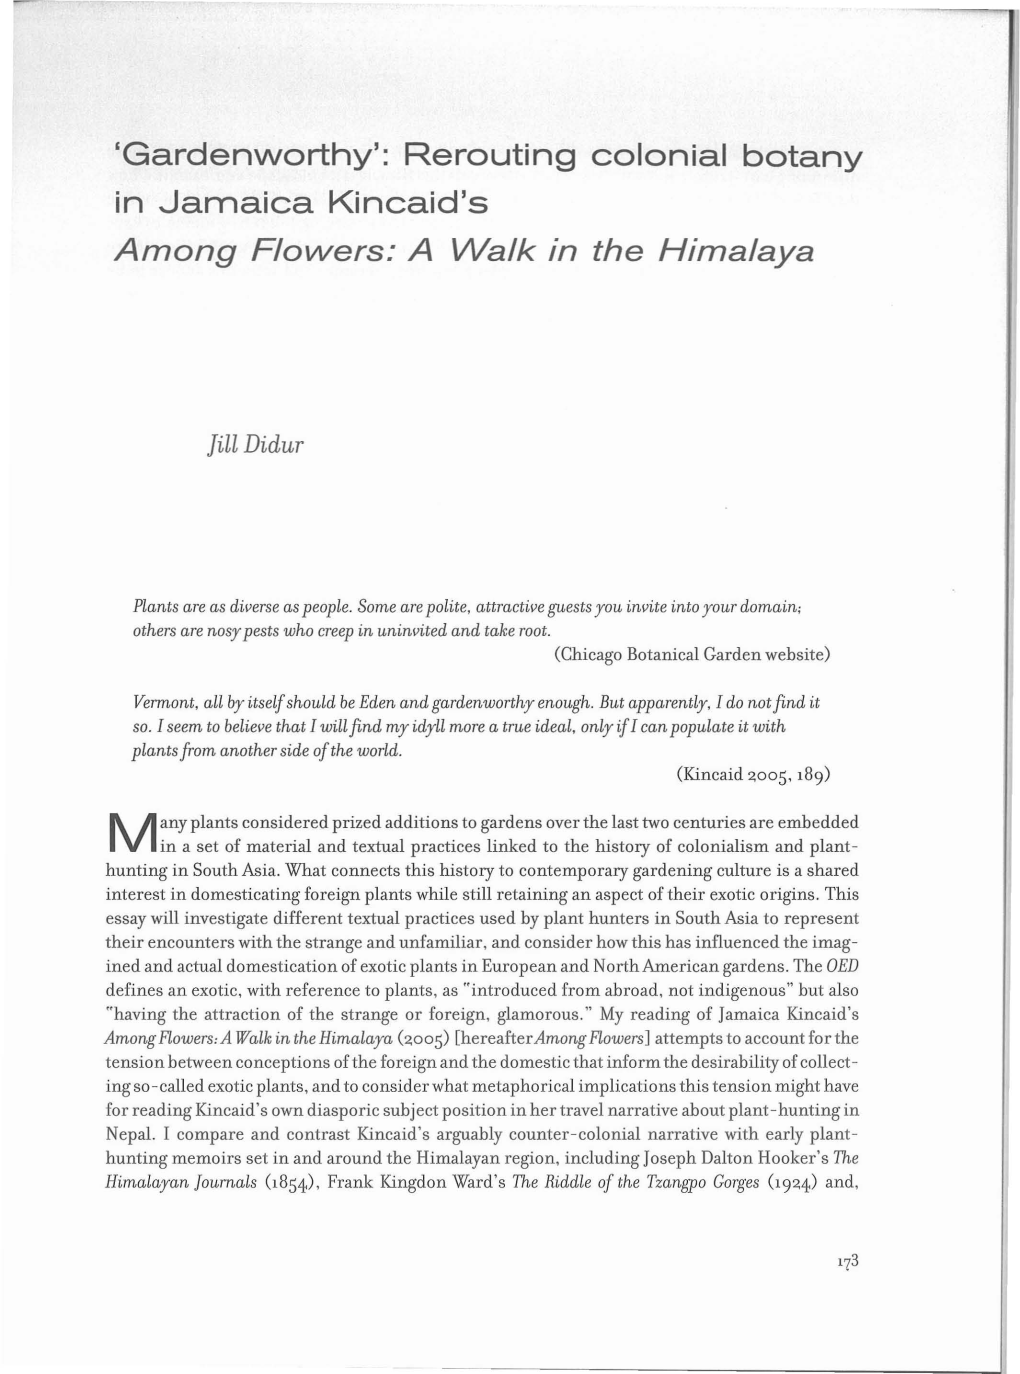 Rerouting Colonial Botany in Jamaica Kincaid's Among Flowers: a Walk in the Himalaya